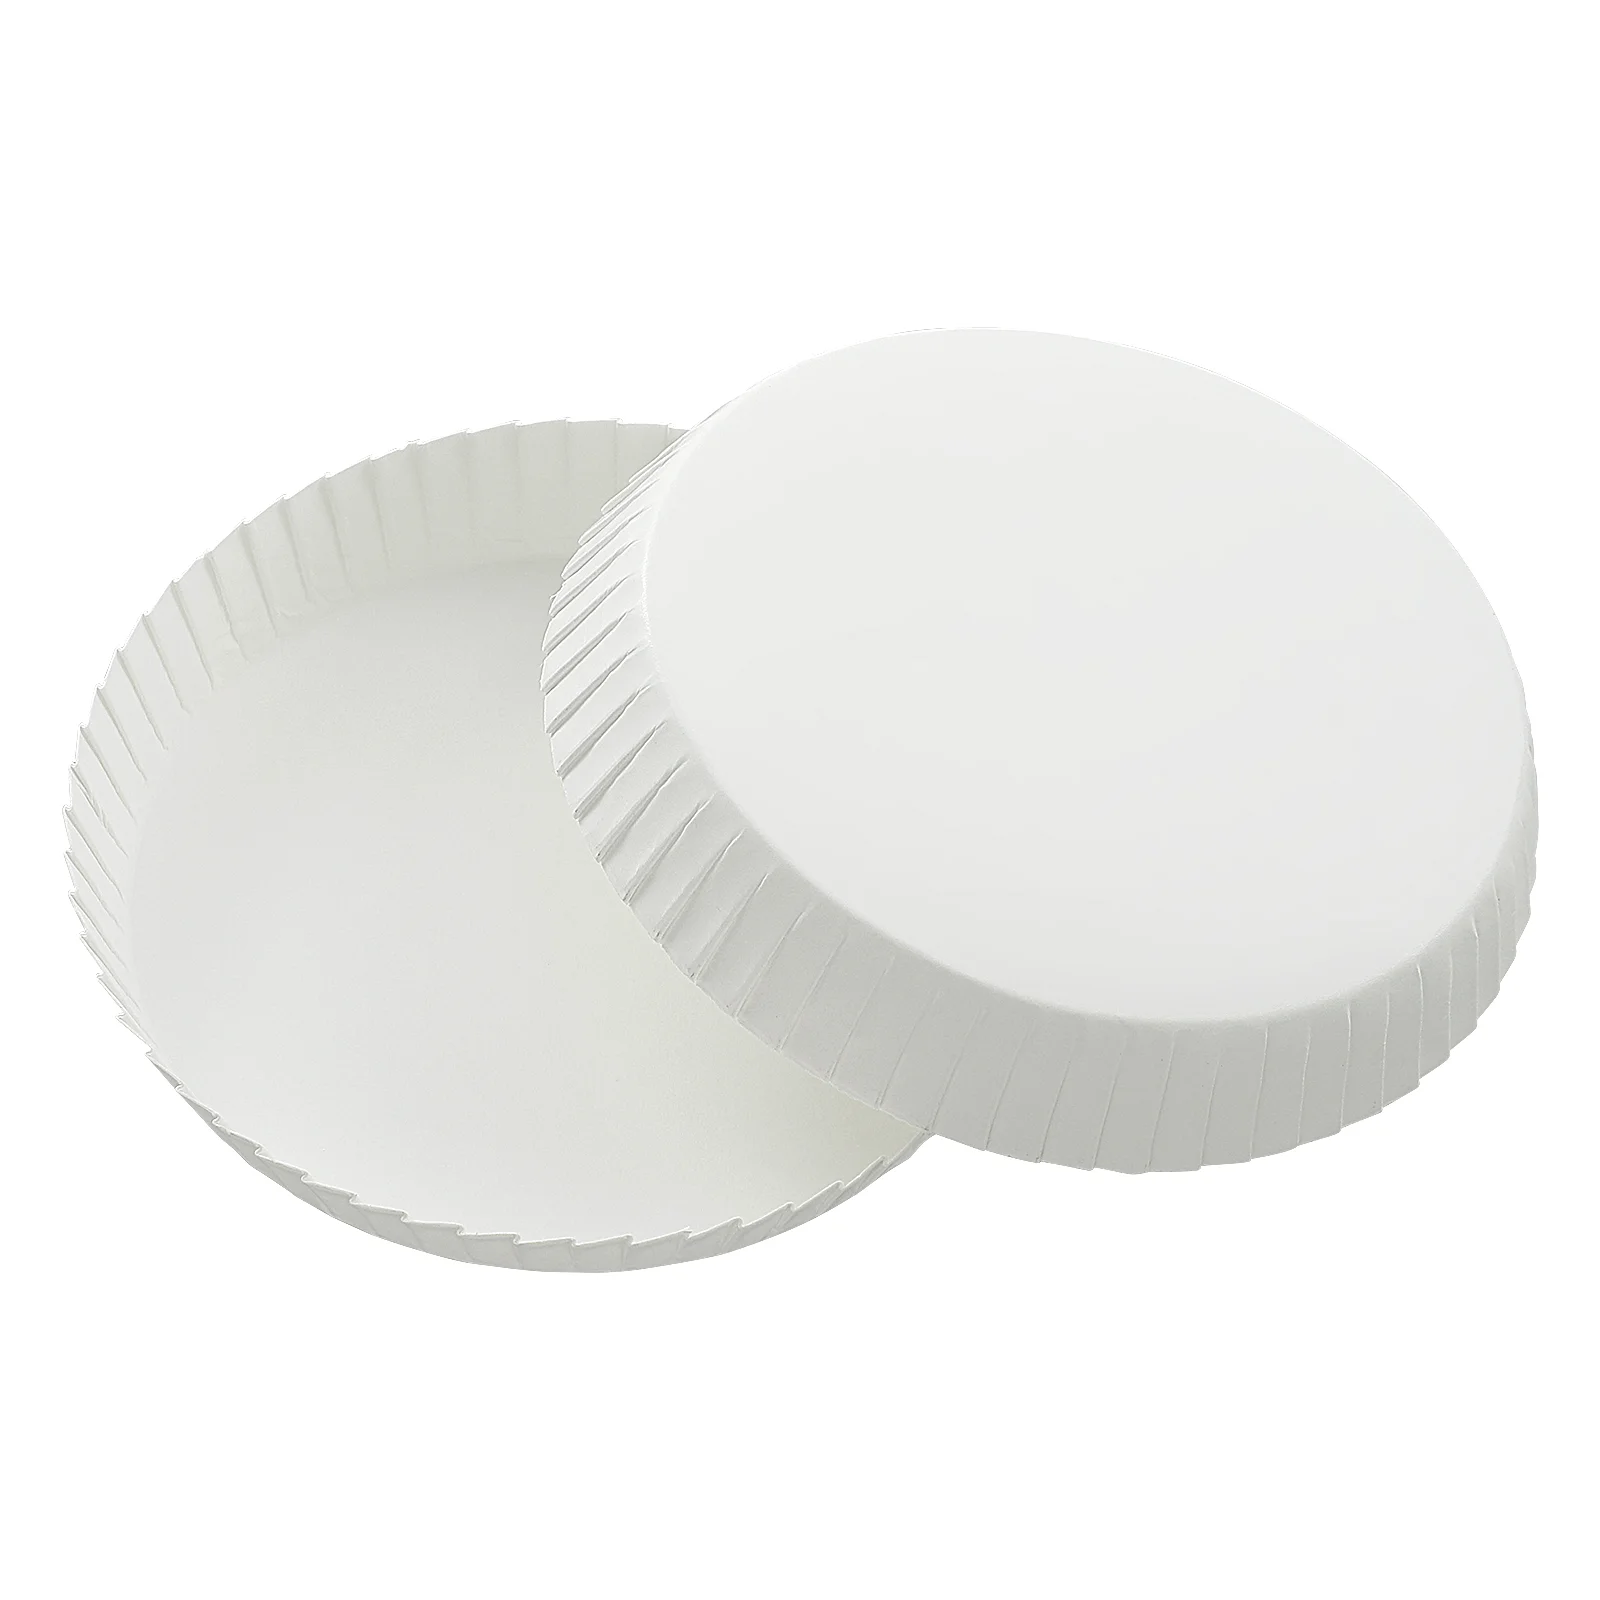 

Cup Lids Covers Paper Cover Coffee Lid Disposable Drinks Drink Drinking Hot Cups Hotel Cap Outside Recycle Recycled White Wide